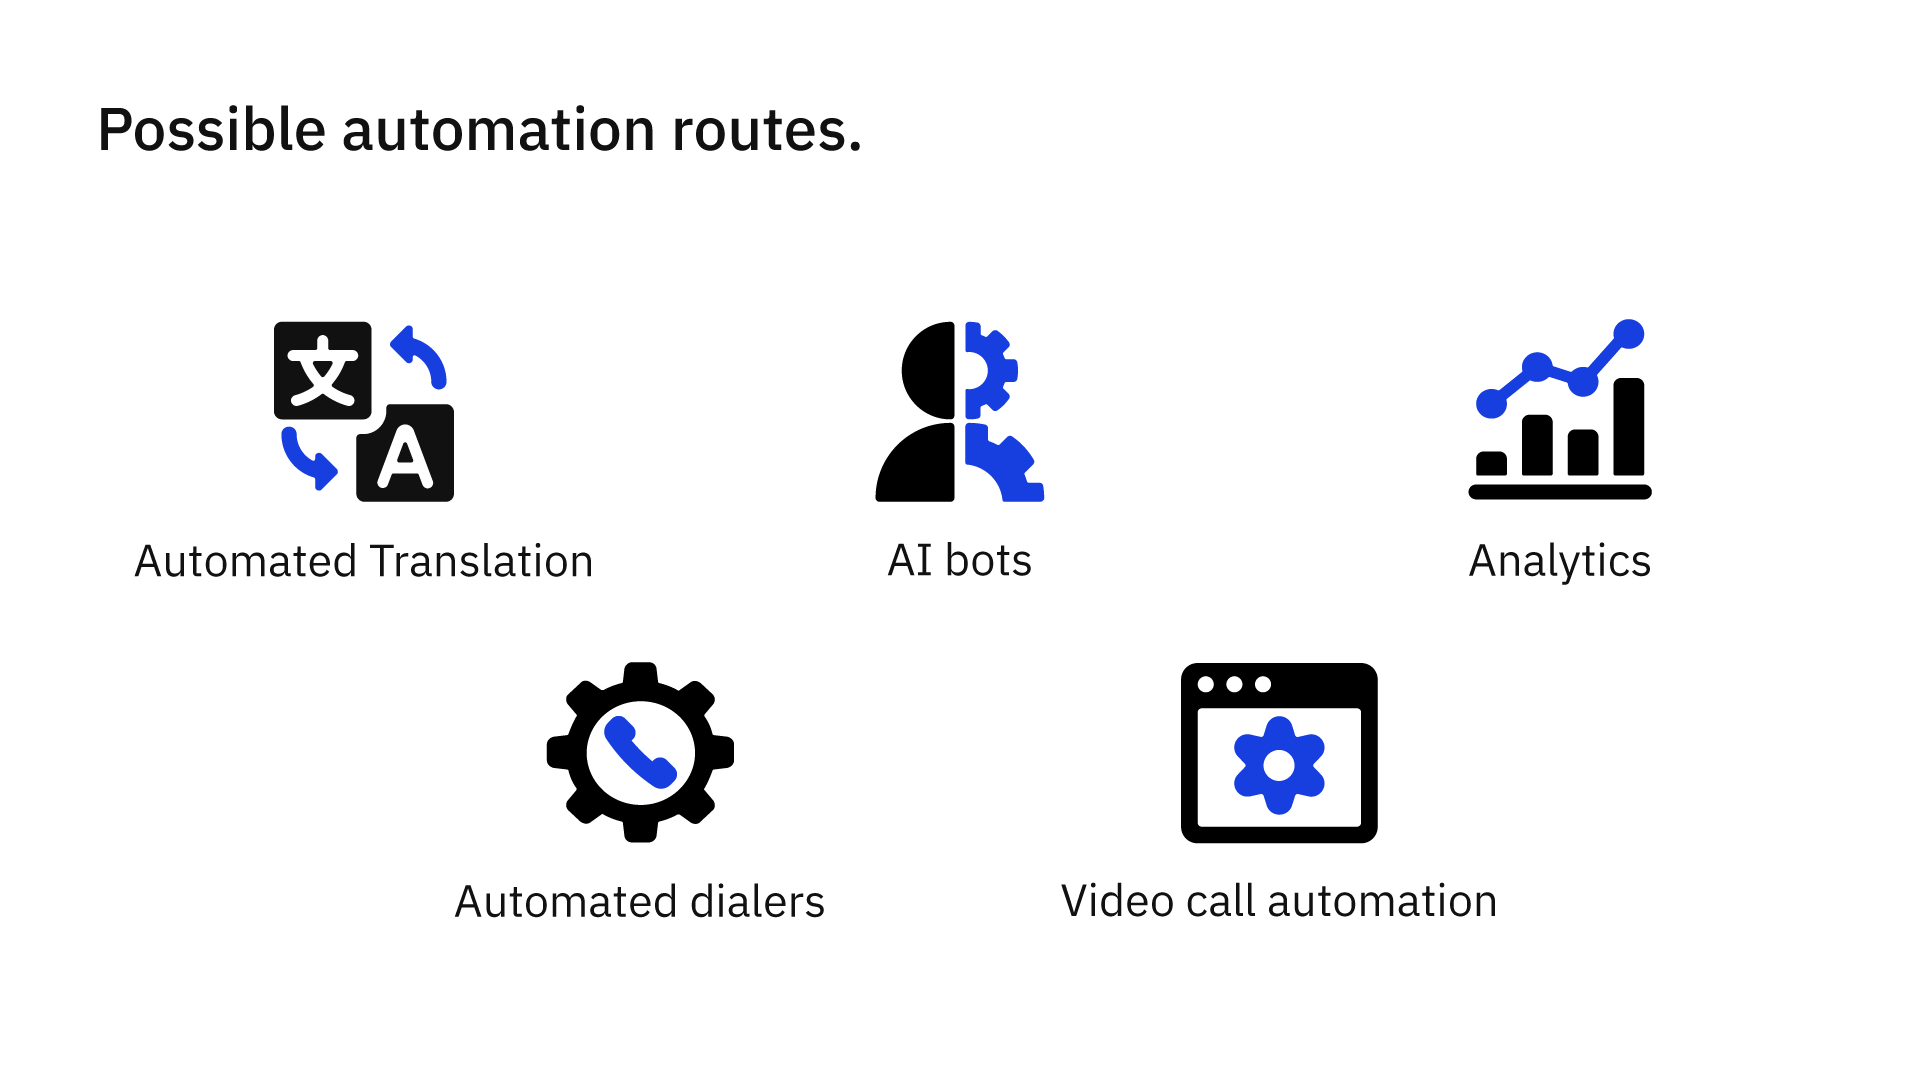 Ways of automating processes.